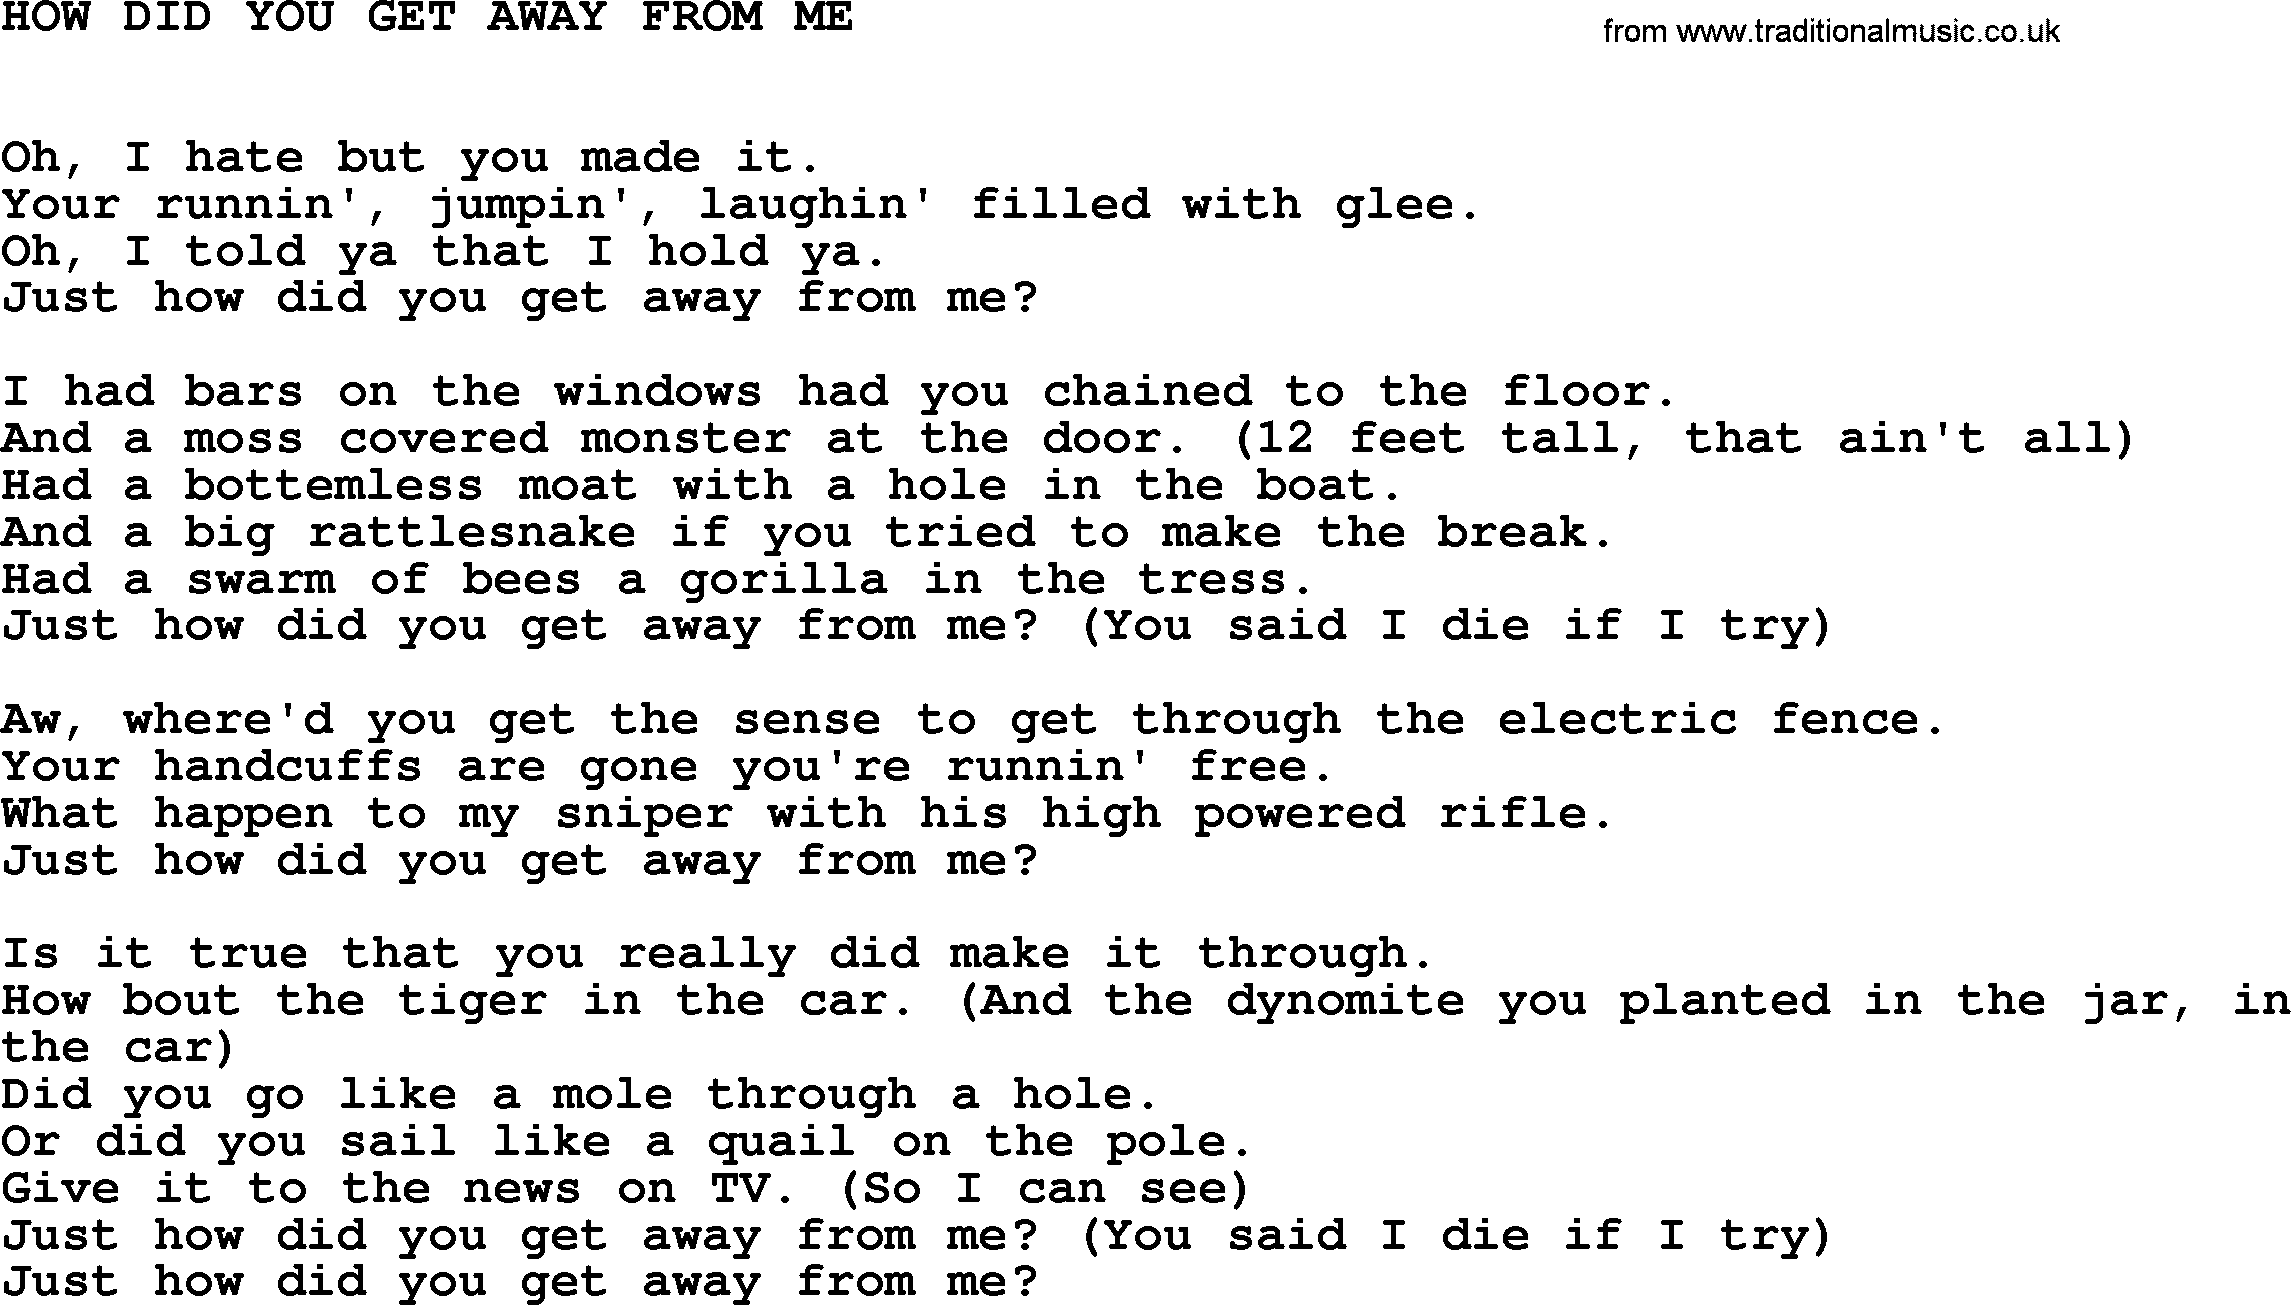 Johnny Cash song How Did You Get Away From Me.txt lyrics